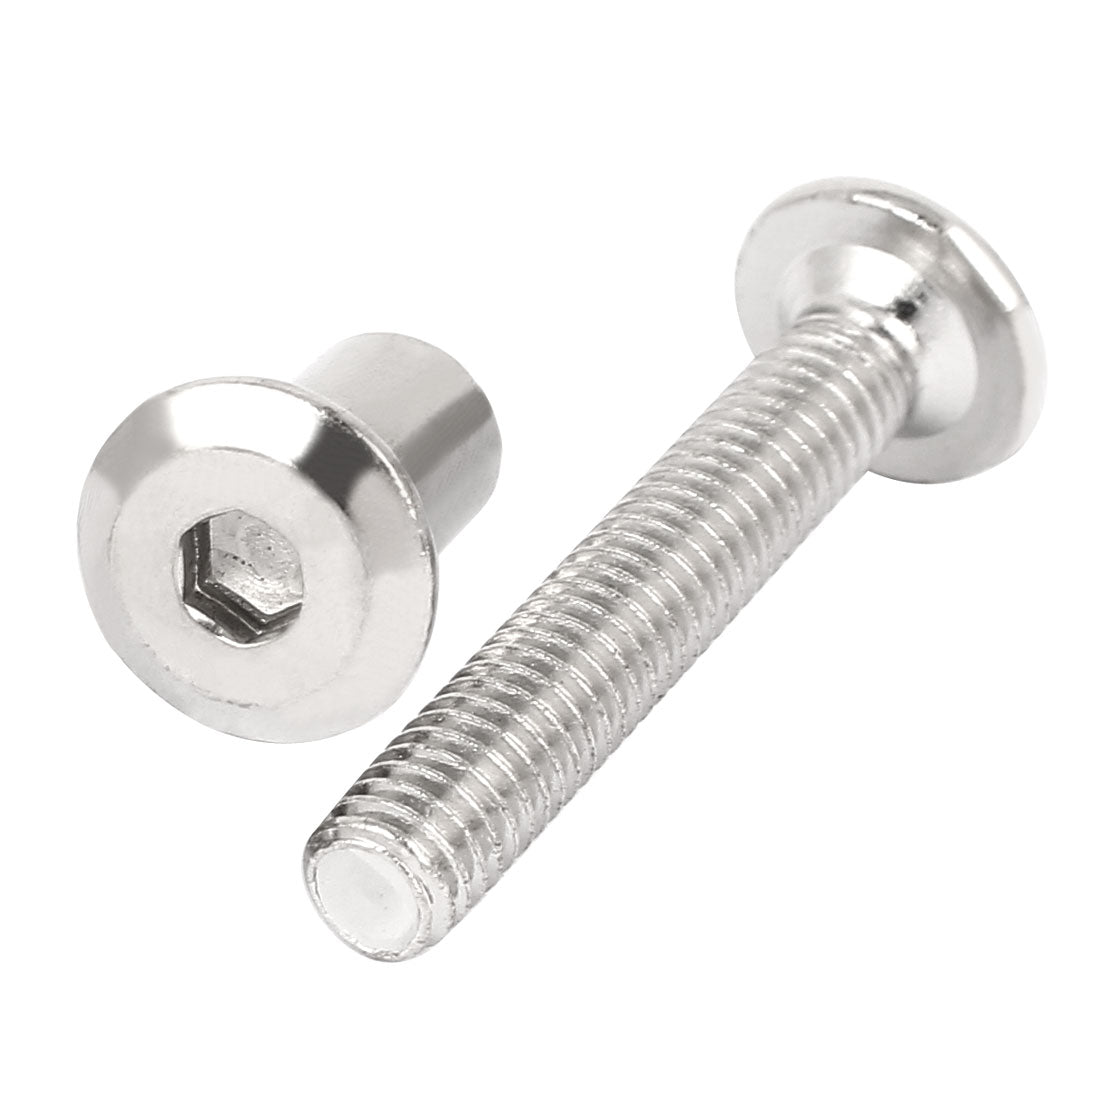 uxcell Uxcell M6 x 50mm Hex Socket Head Nut Countersunk Screw Bolt Fasteners 10 Sets